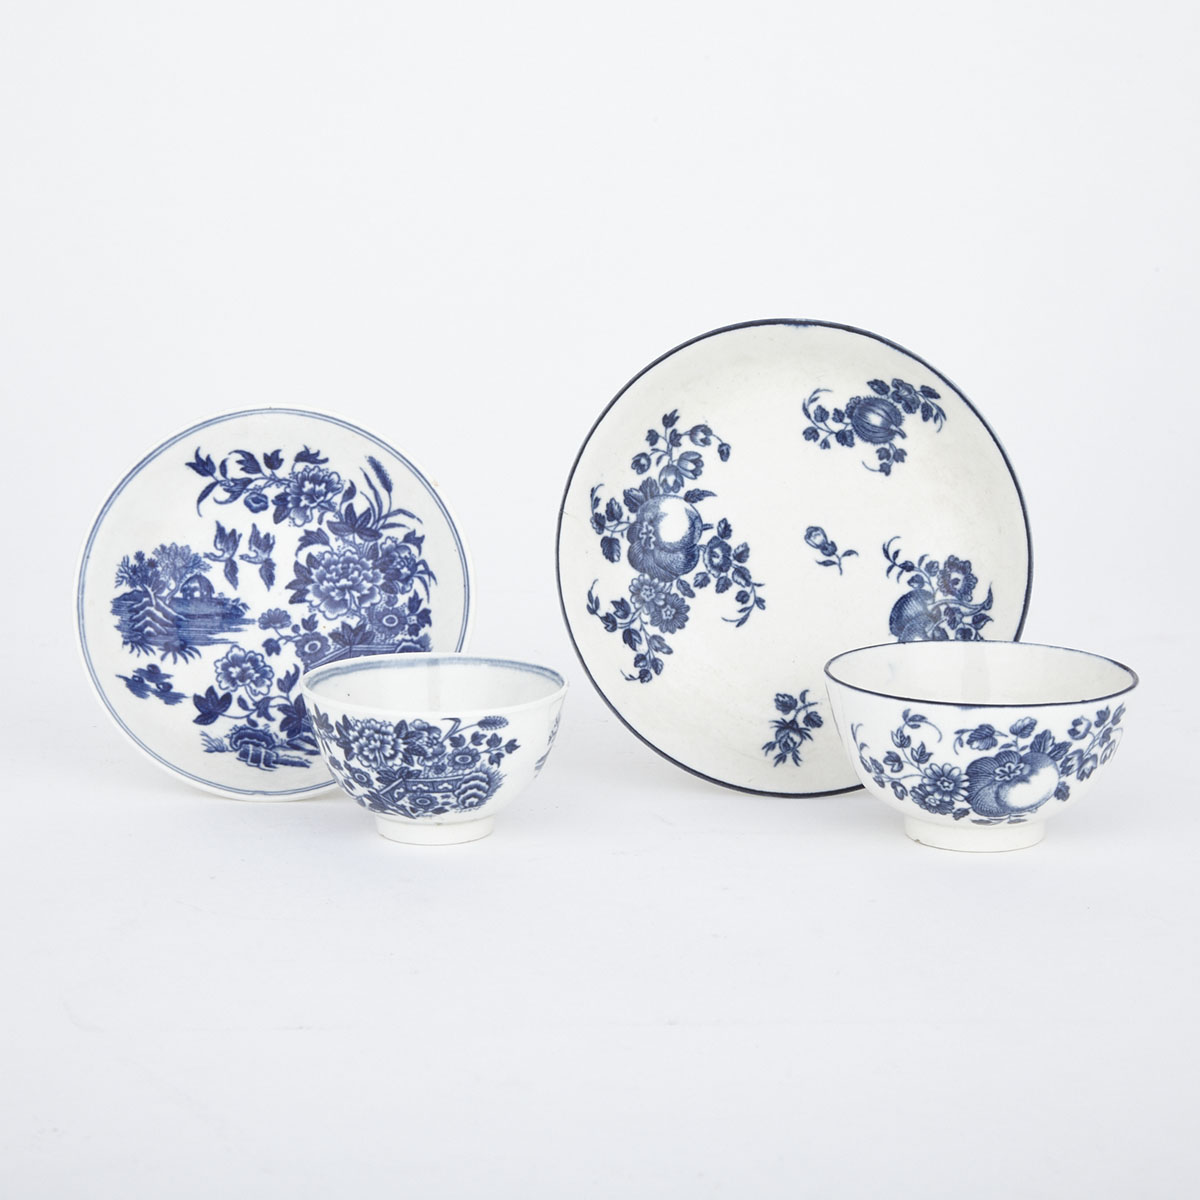 Two Worcester Blue Printed Tea Bowls and Saucers, ‘Fruit Sprigs’ and ‘Fence’ Pattern, c.1770-80